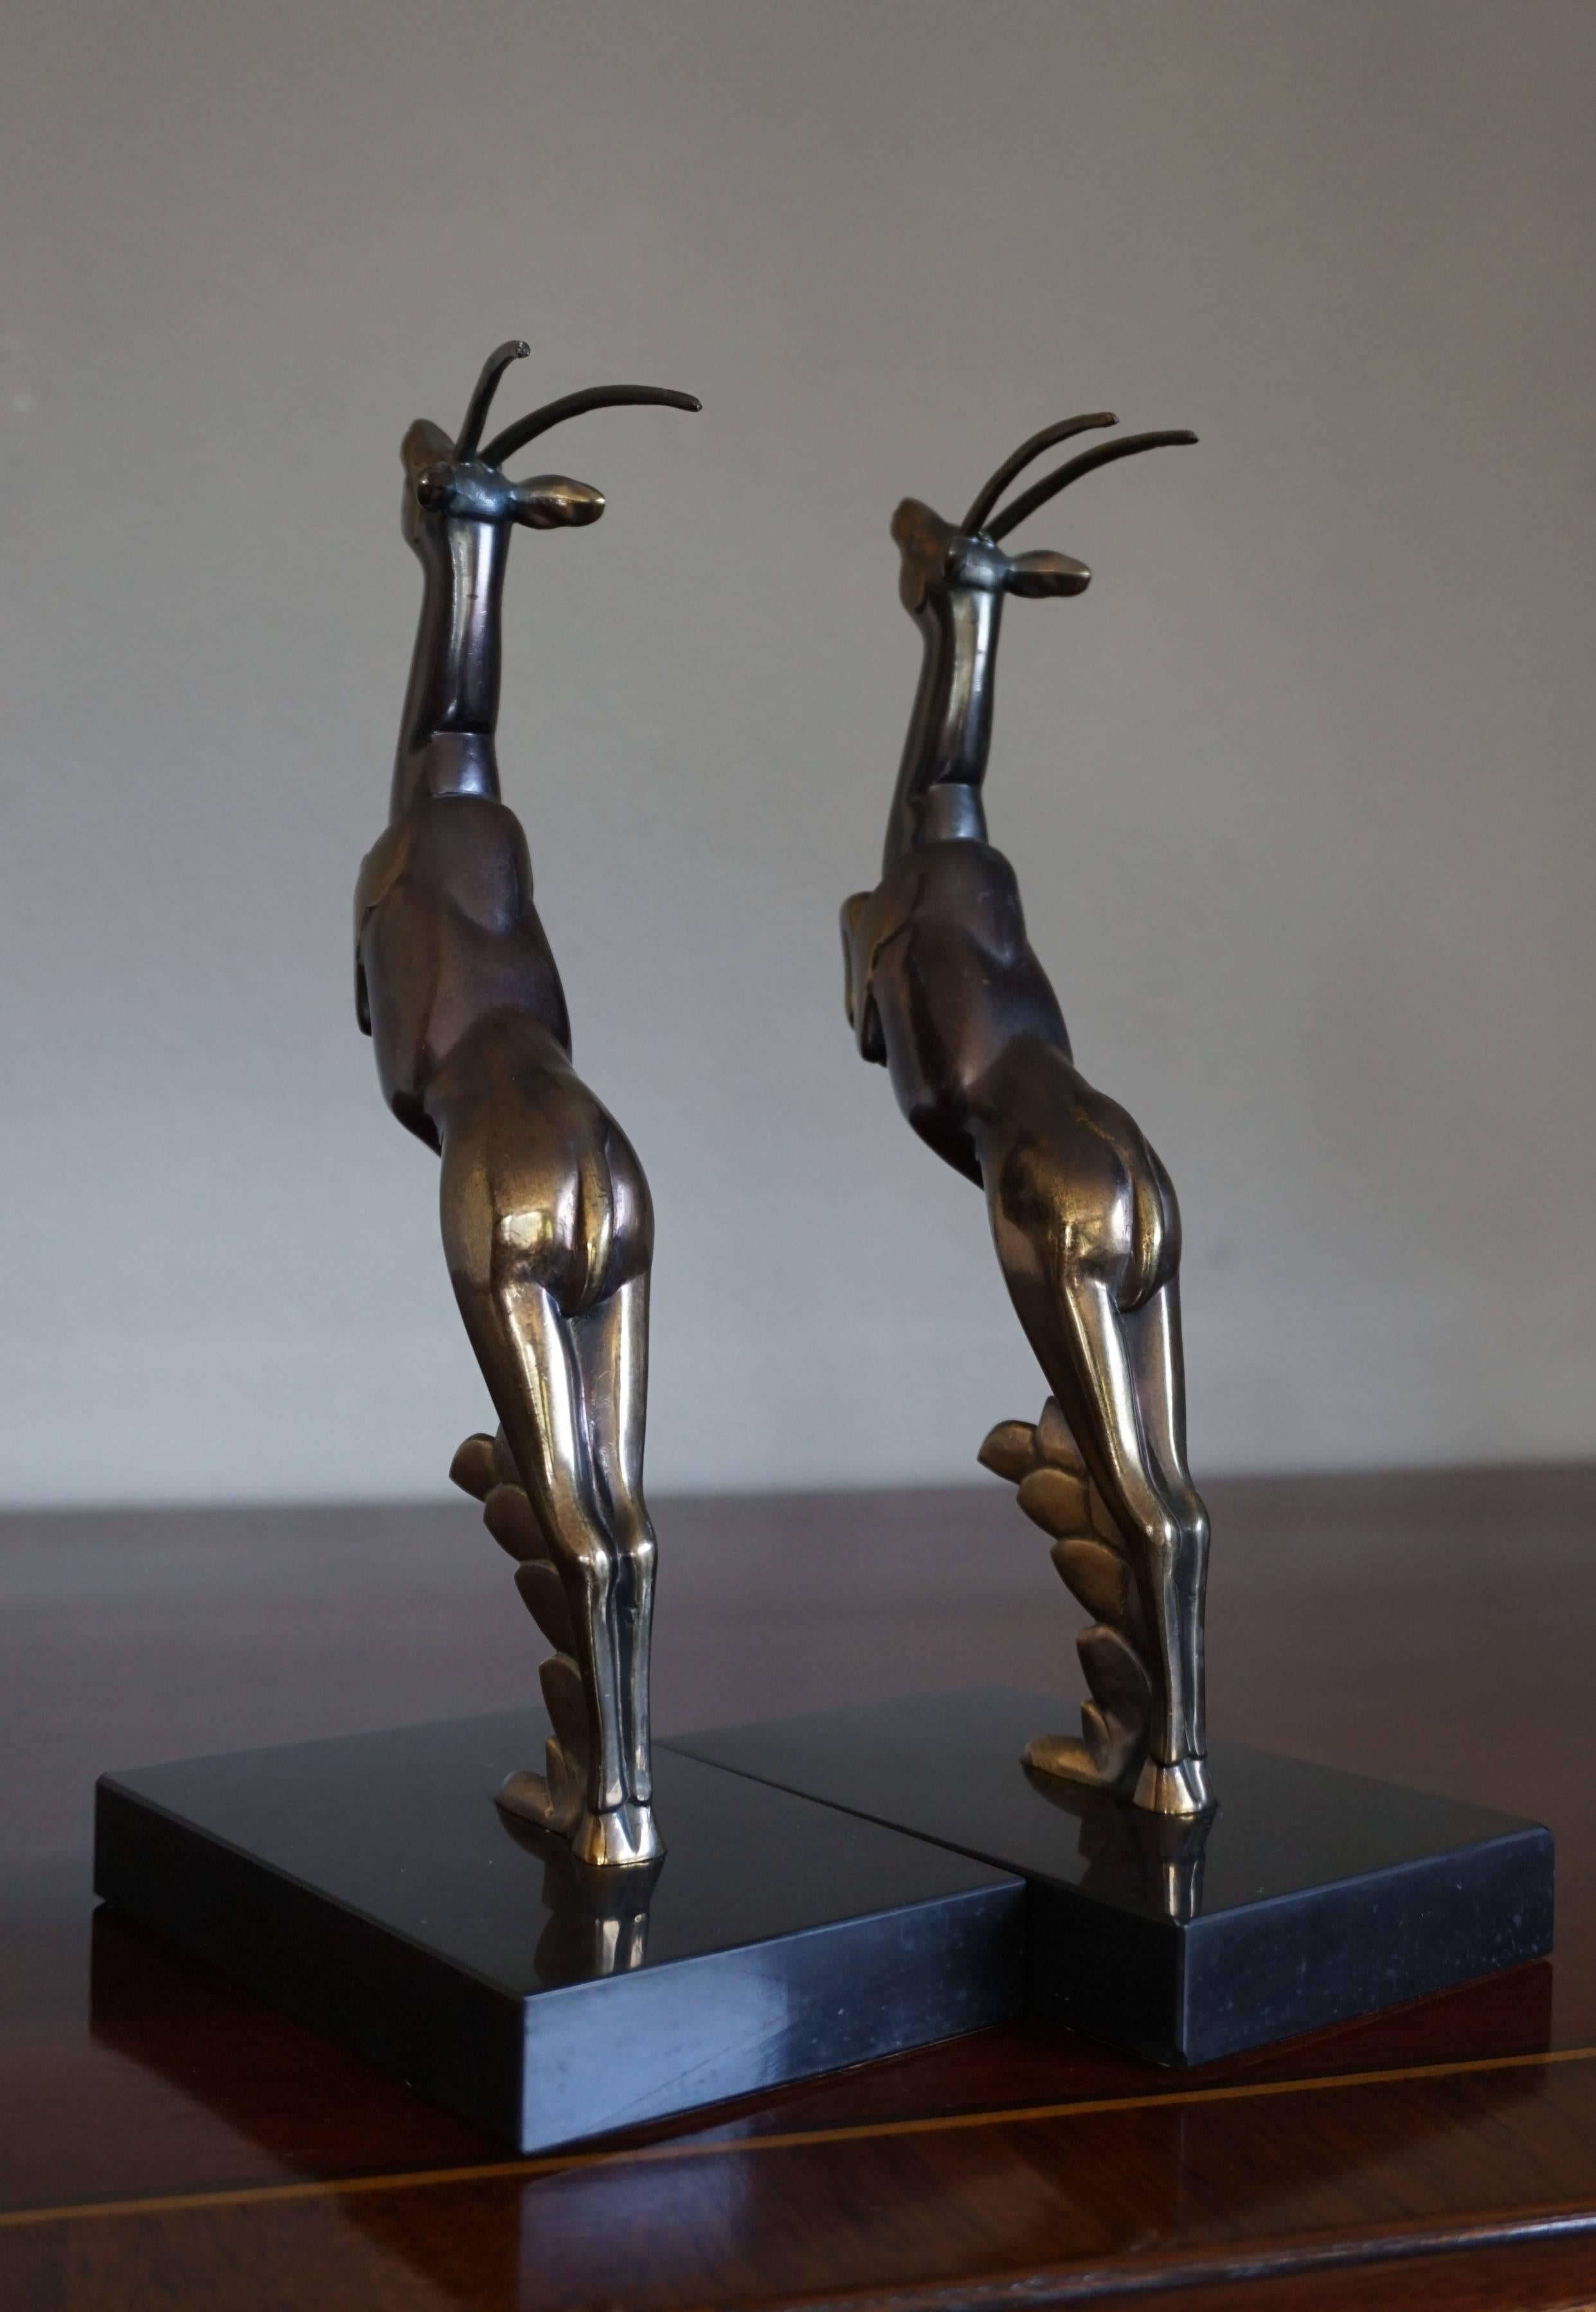 Pair of Art Deco Bookends with Brass Jumping Deer Sculptures on Marble Base For Sale 8